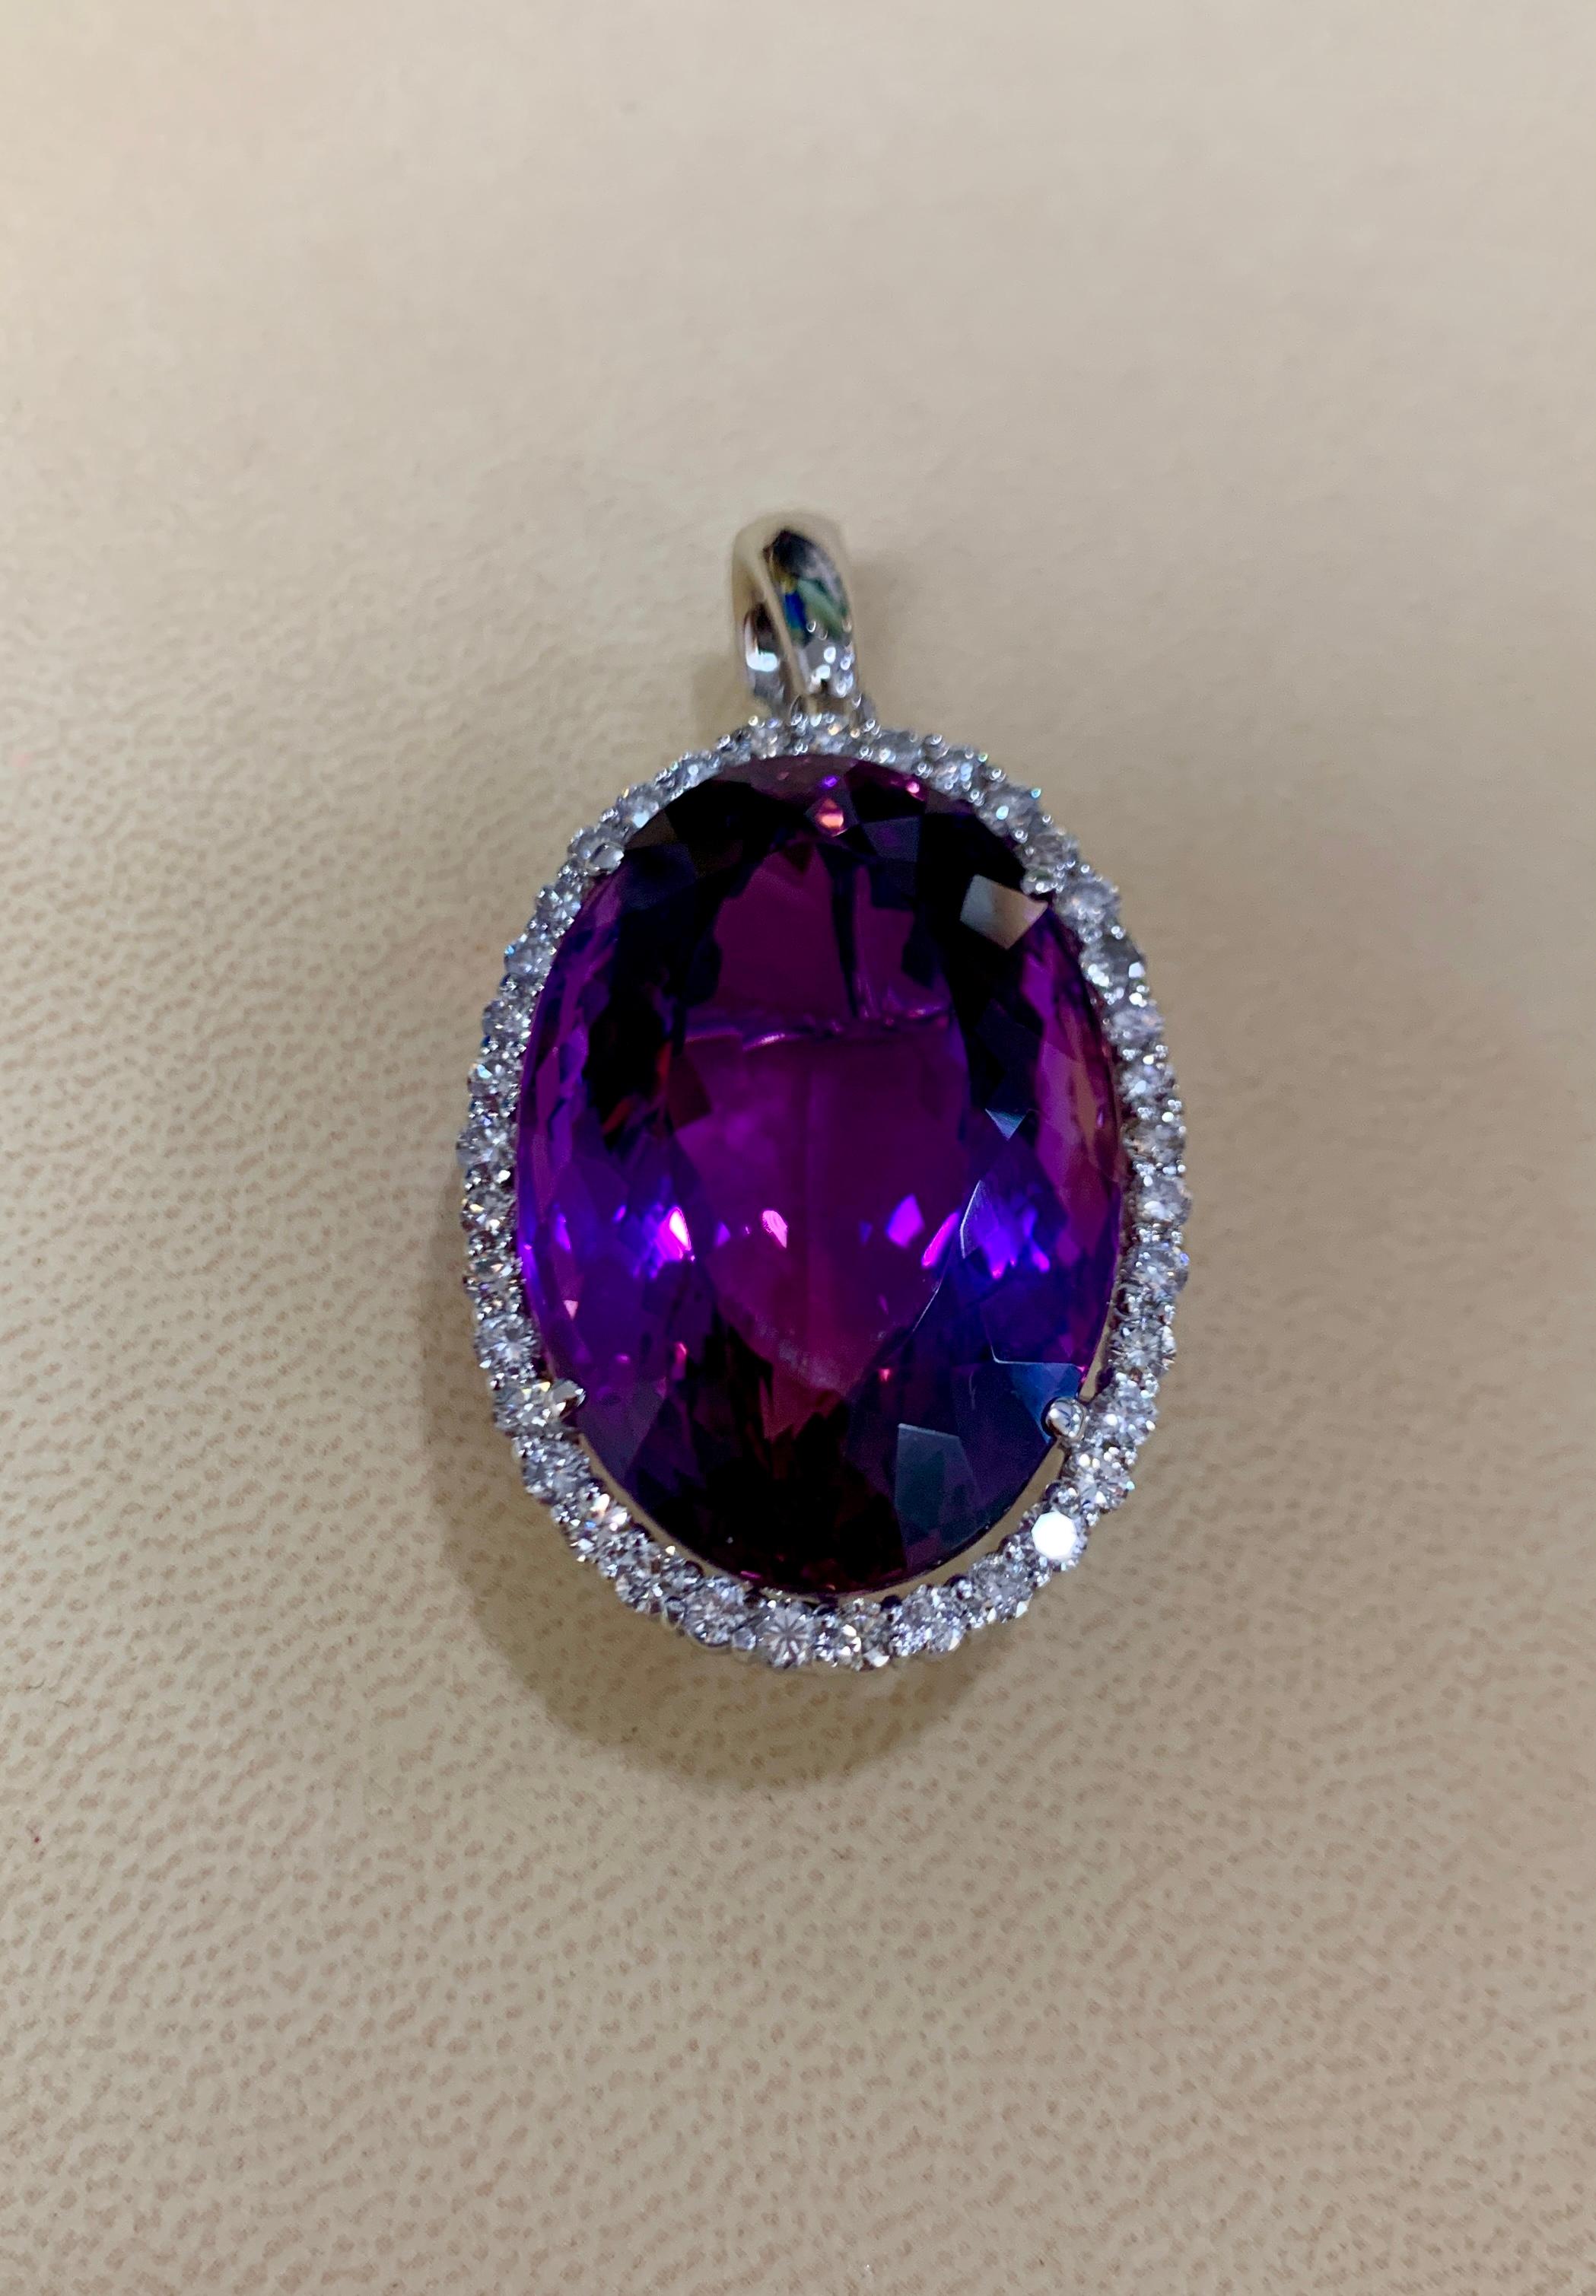 78 Carat Amethyst & 3.5 ct Diamond Pendant Necklace 14 Karat White Gold + Chain In Excellent Condition For Sale In New York, NY